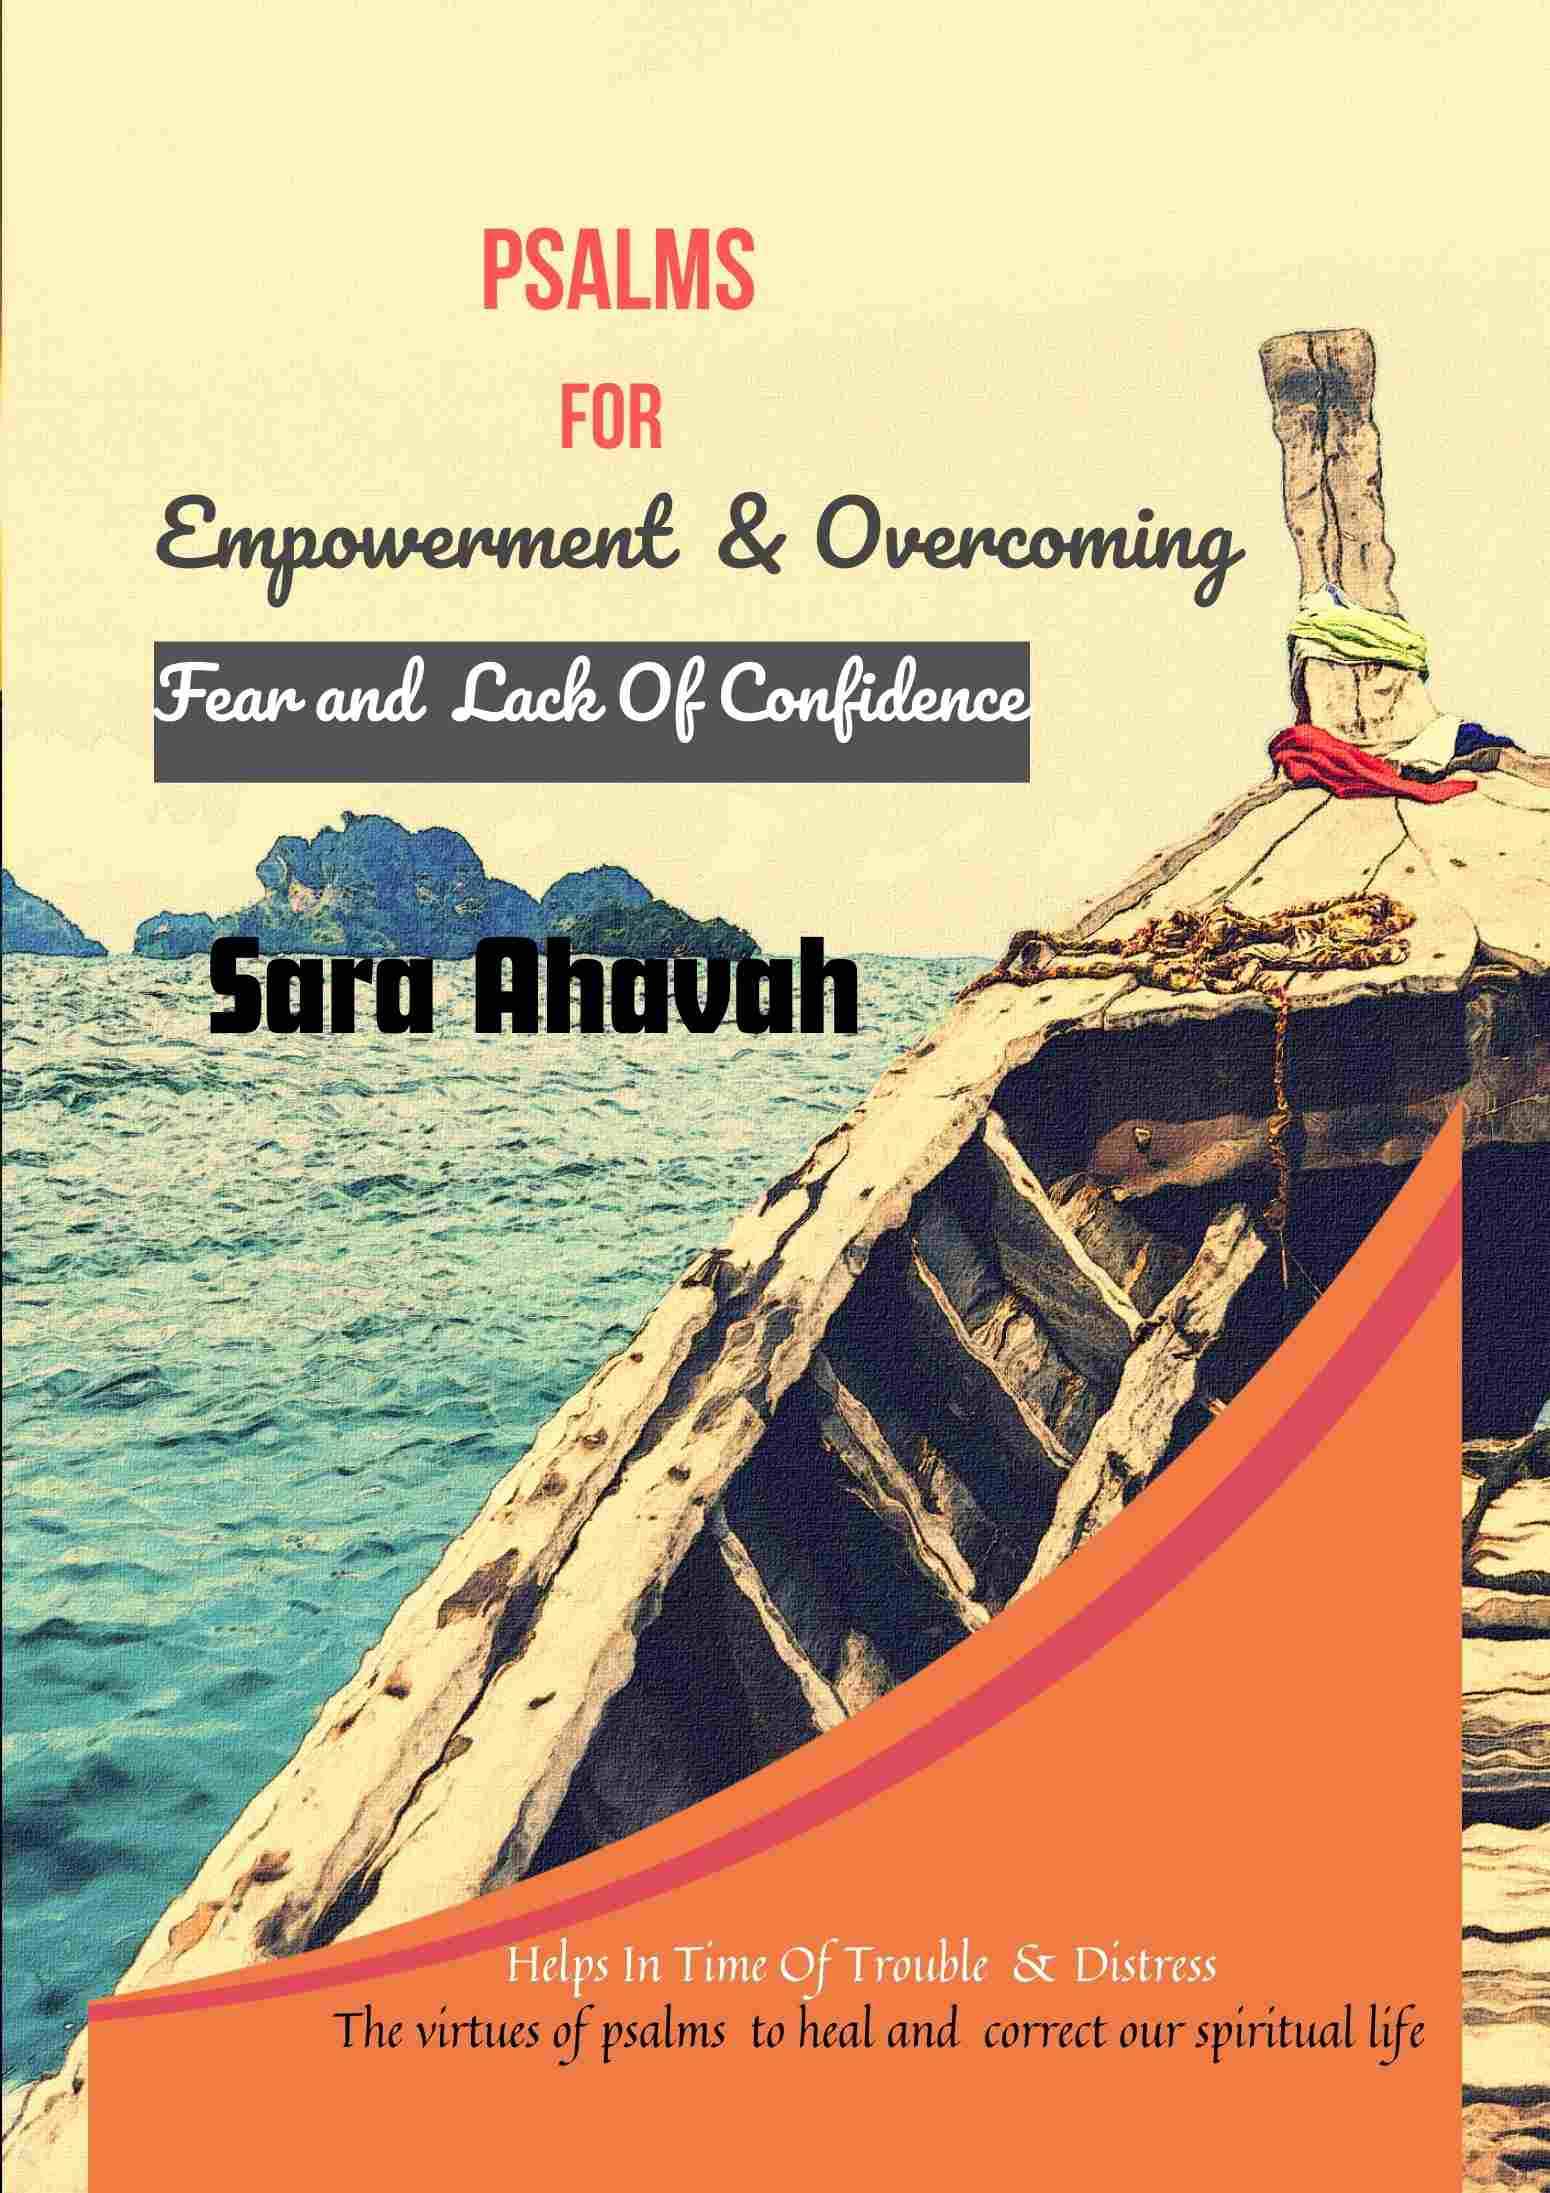 Sarainnerhealing Empowerment-and-overcoming Psalms  For Healing -  Overcome  Fear  and Lack Of Confidence- Digital Download  